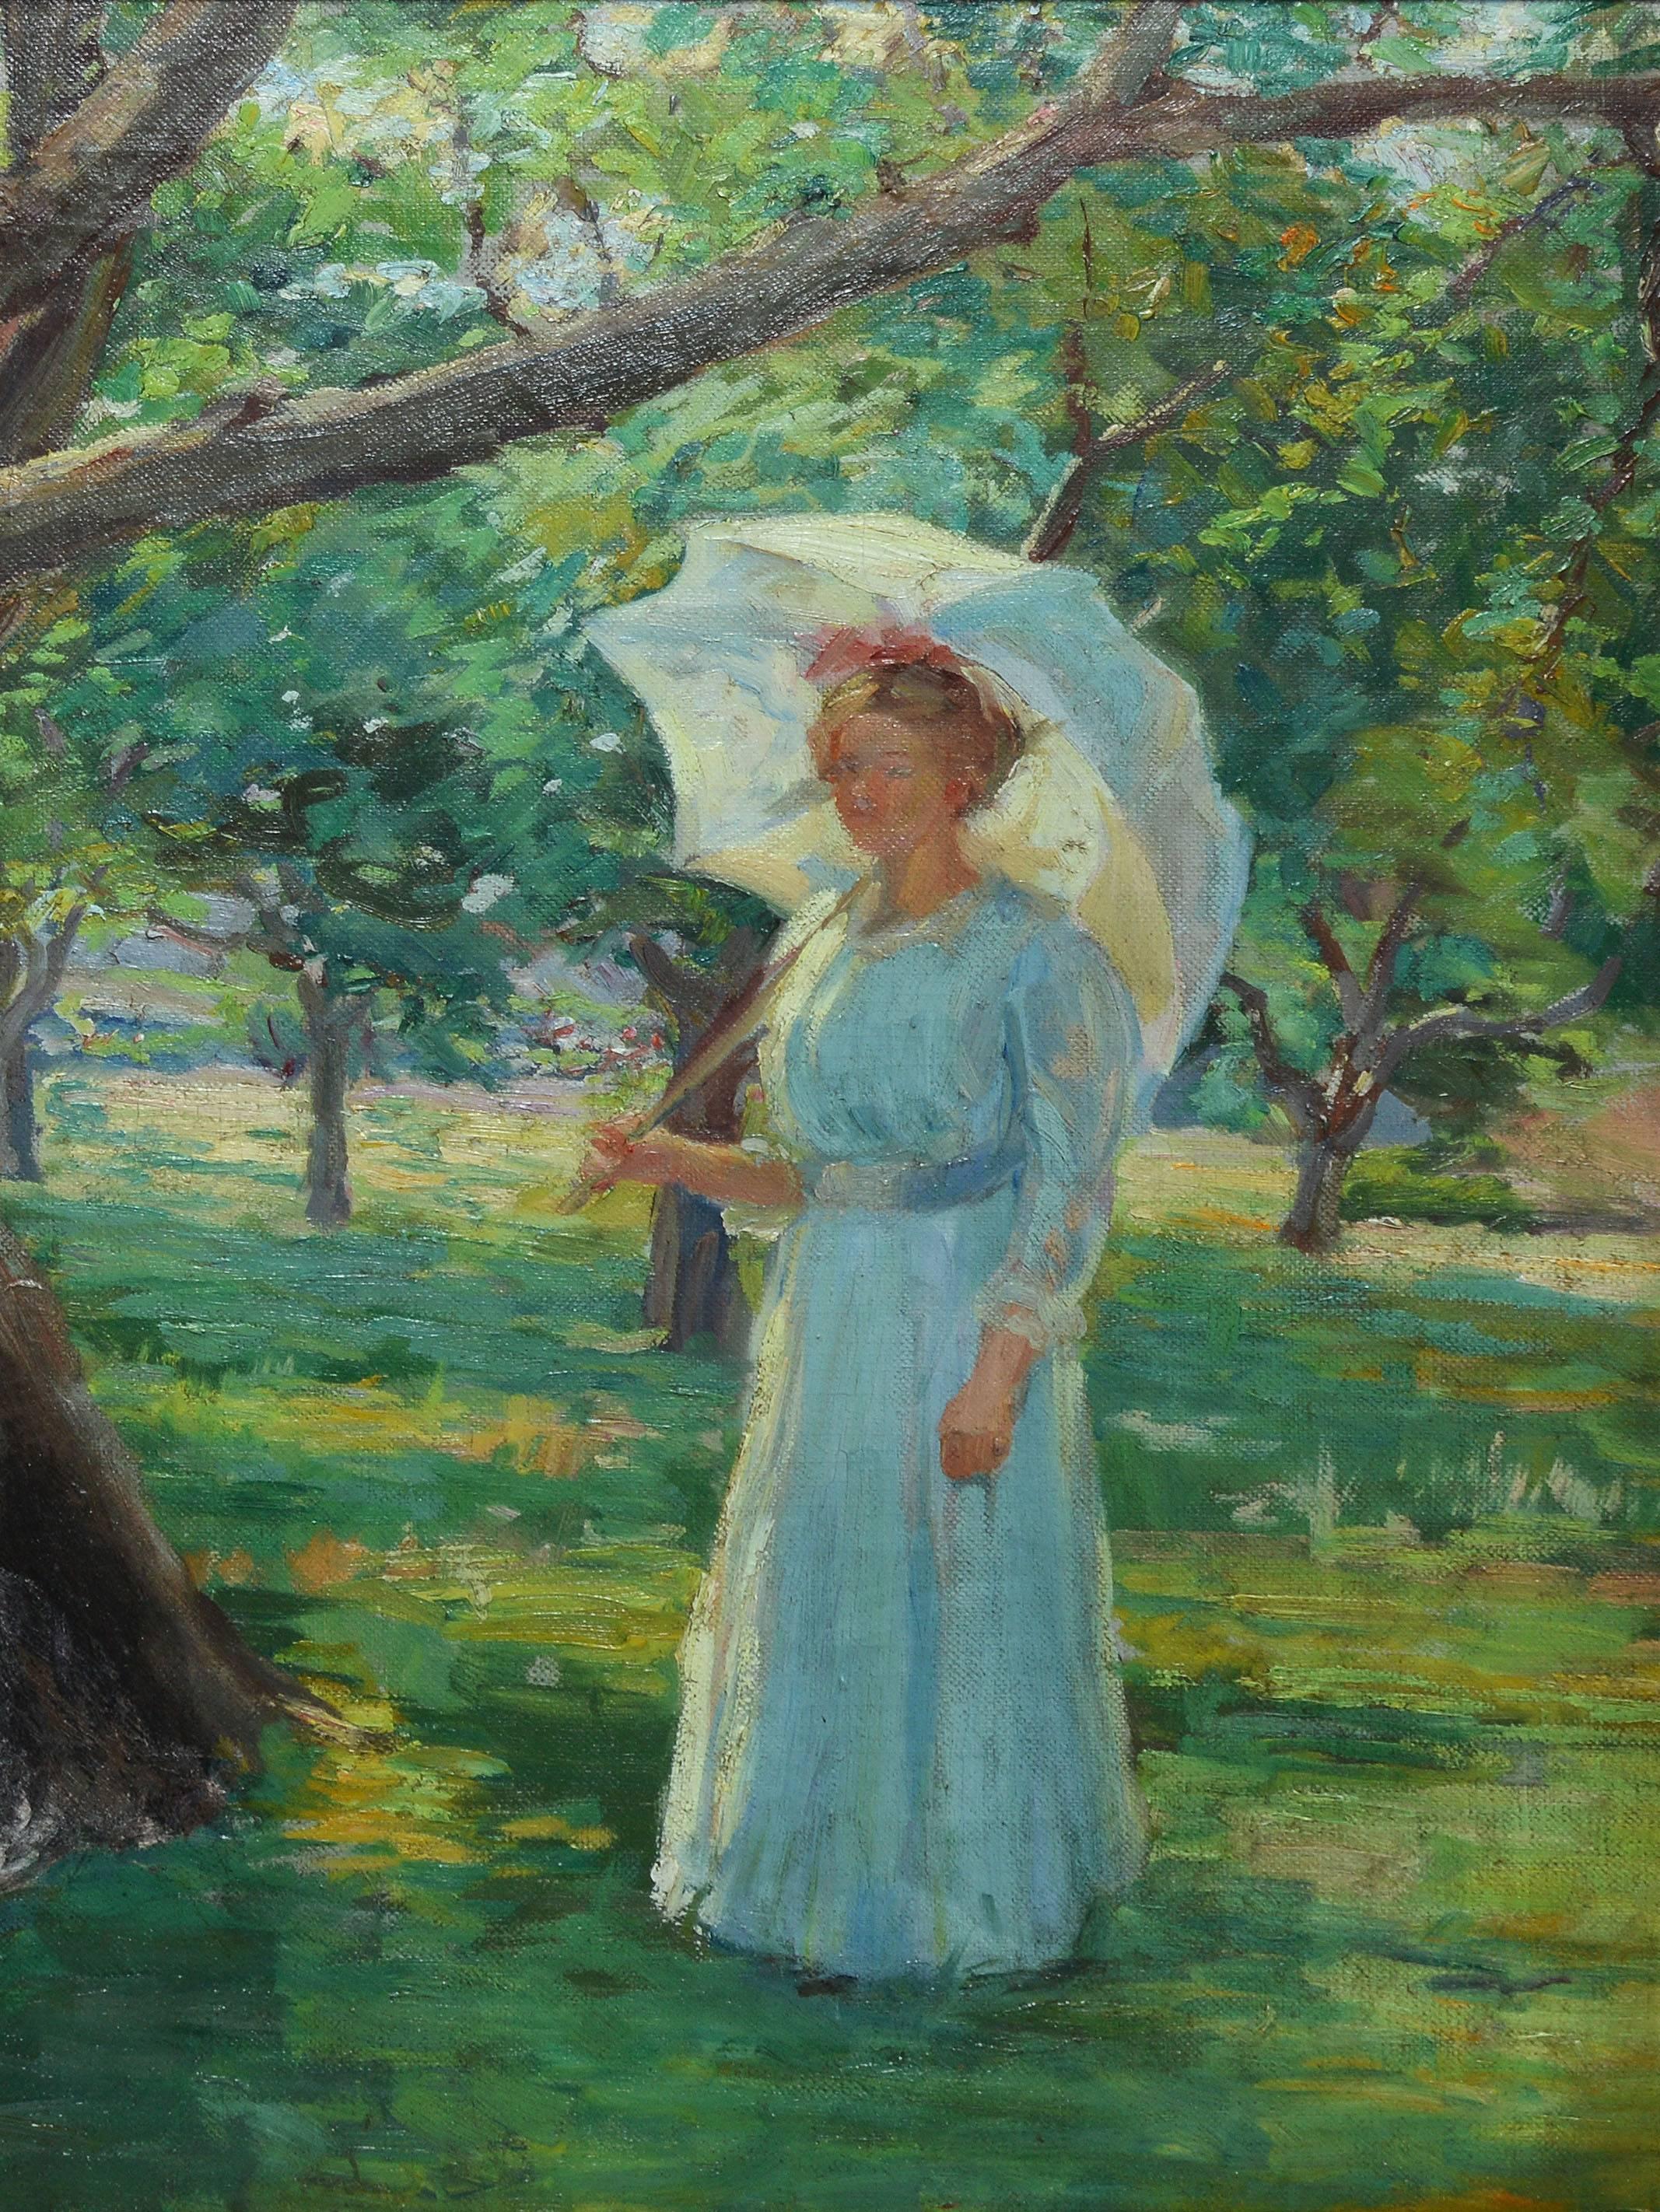 Sunny Day in the Park - American Impressionist Painting by Unknown